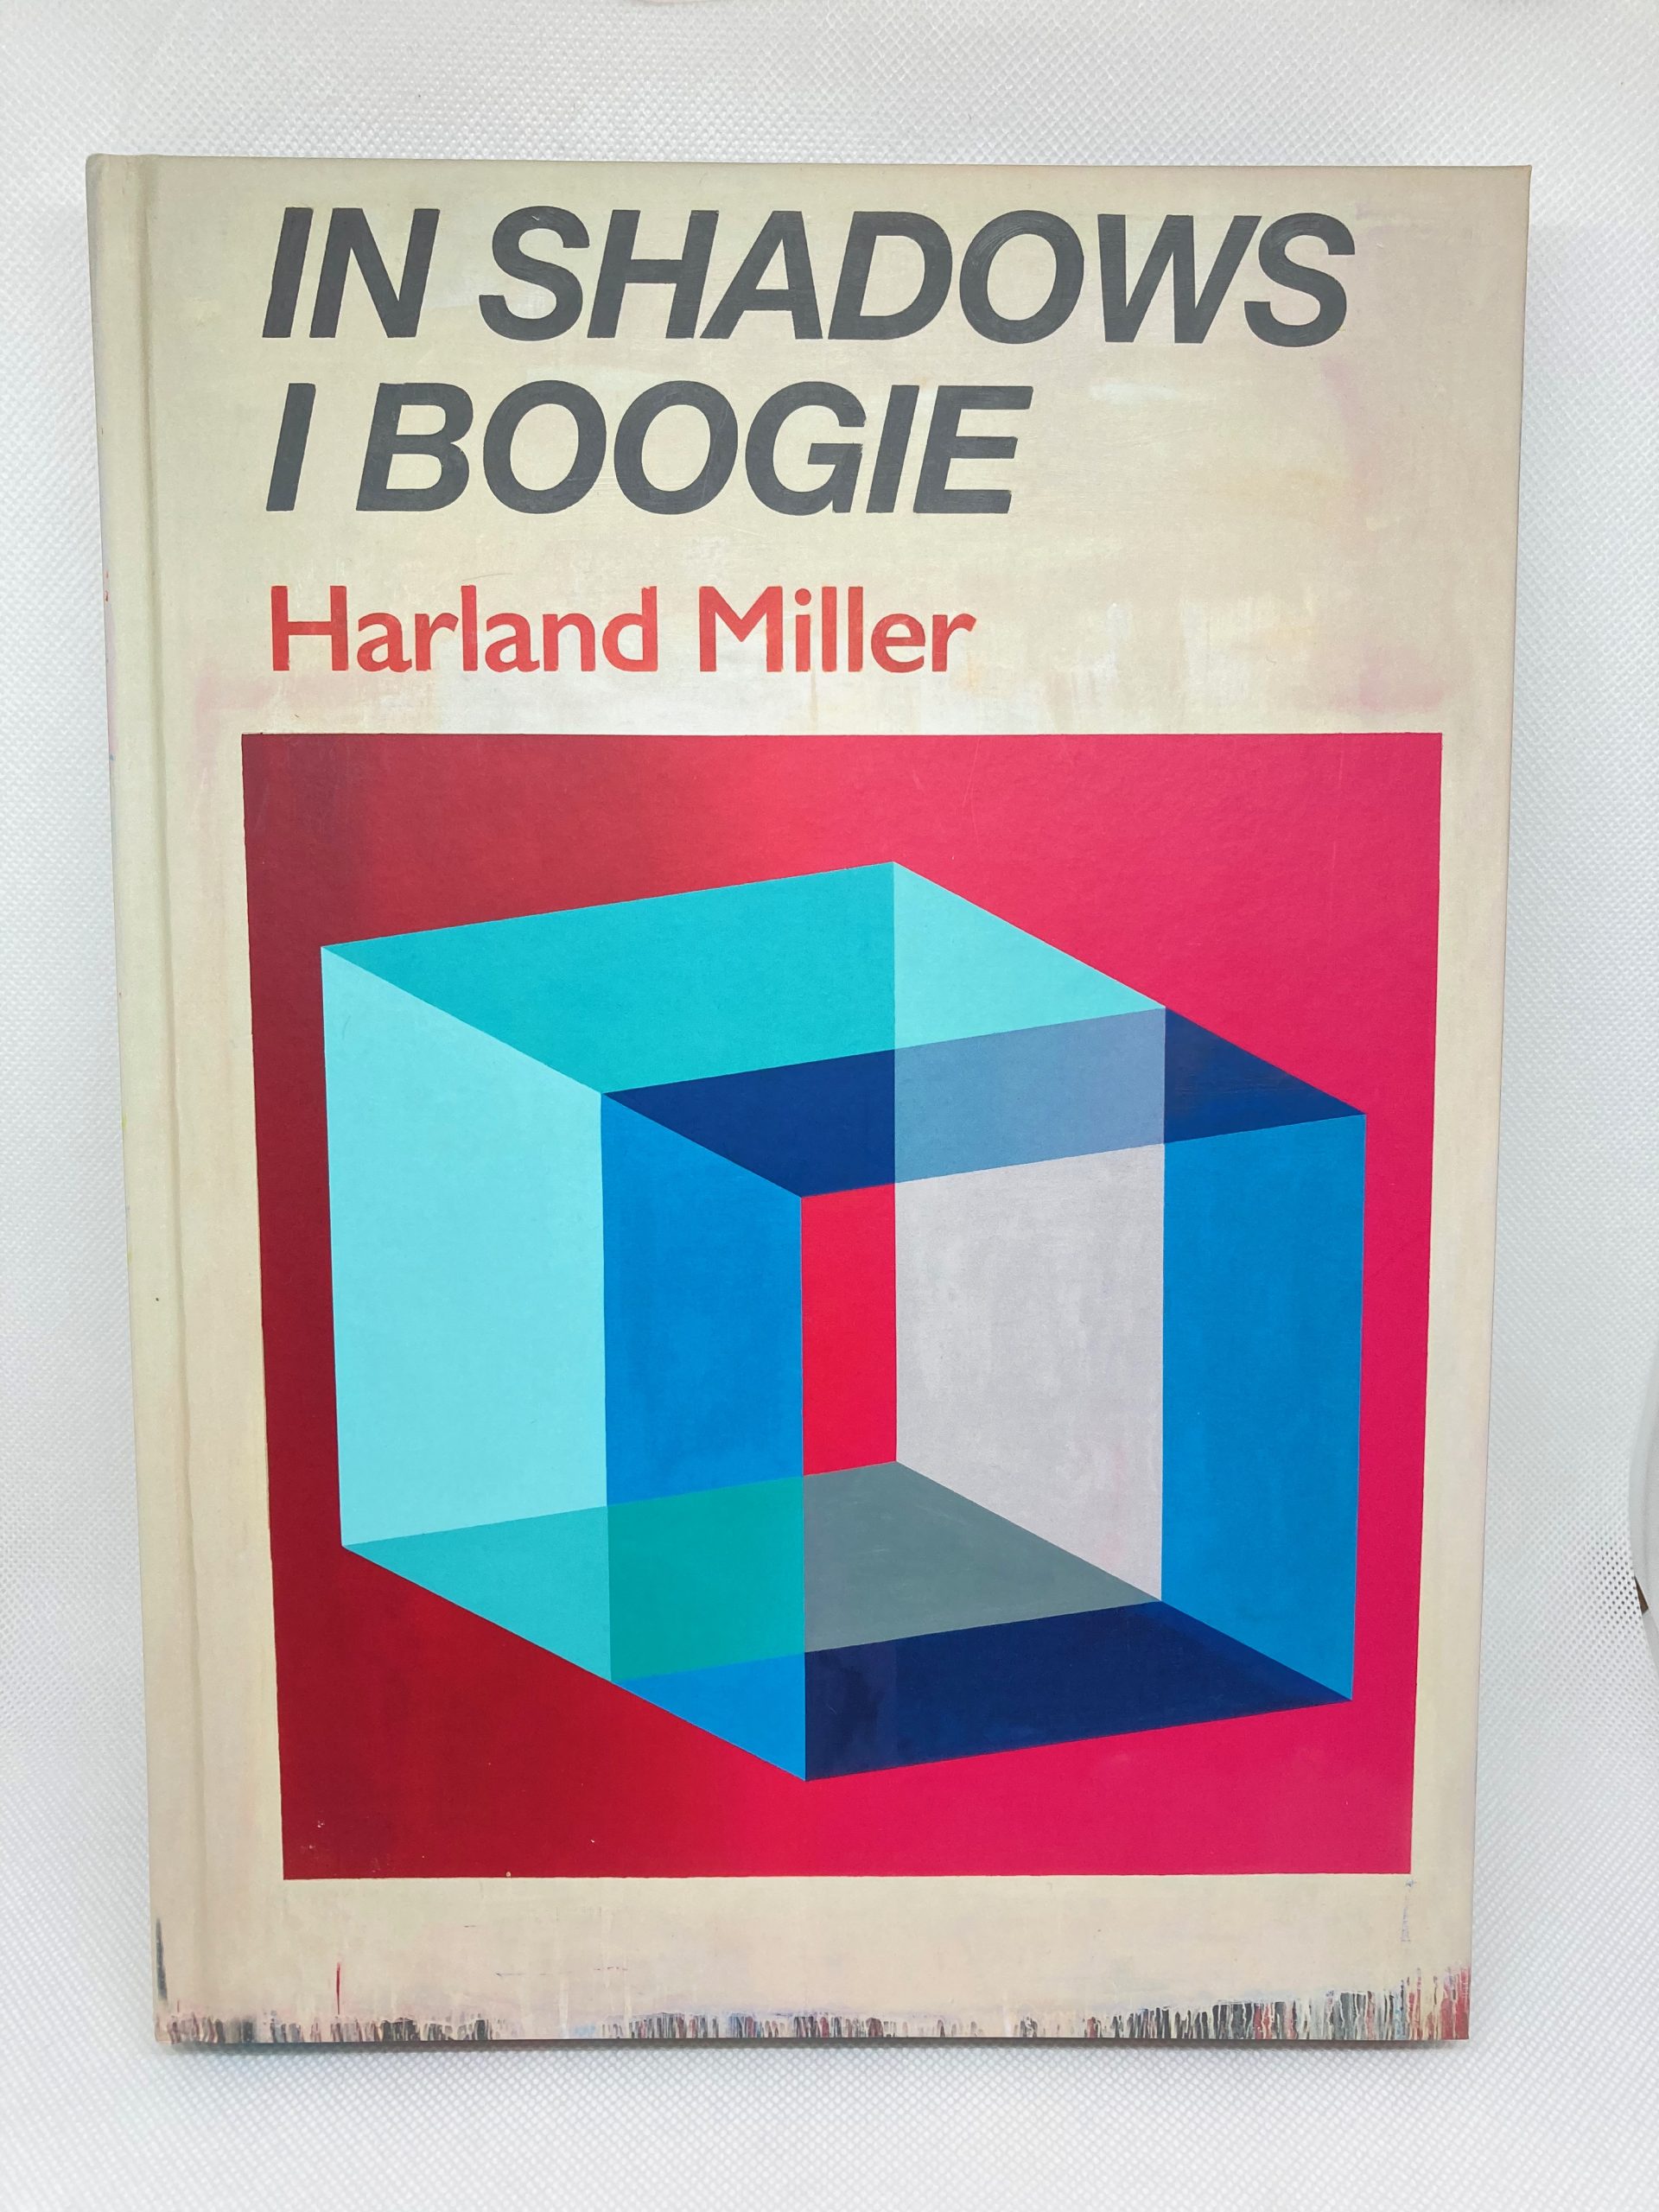 in shadows i boogie signed book harland miller